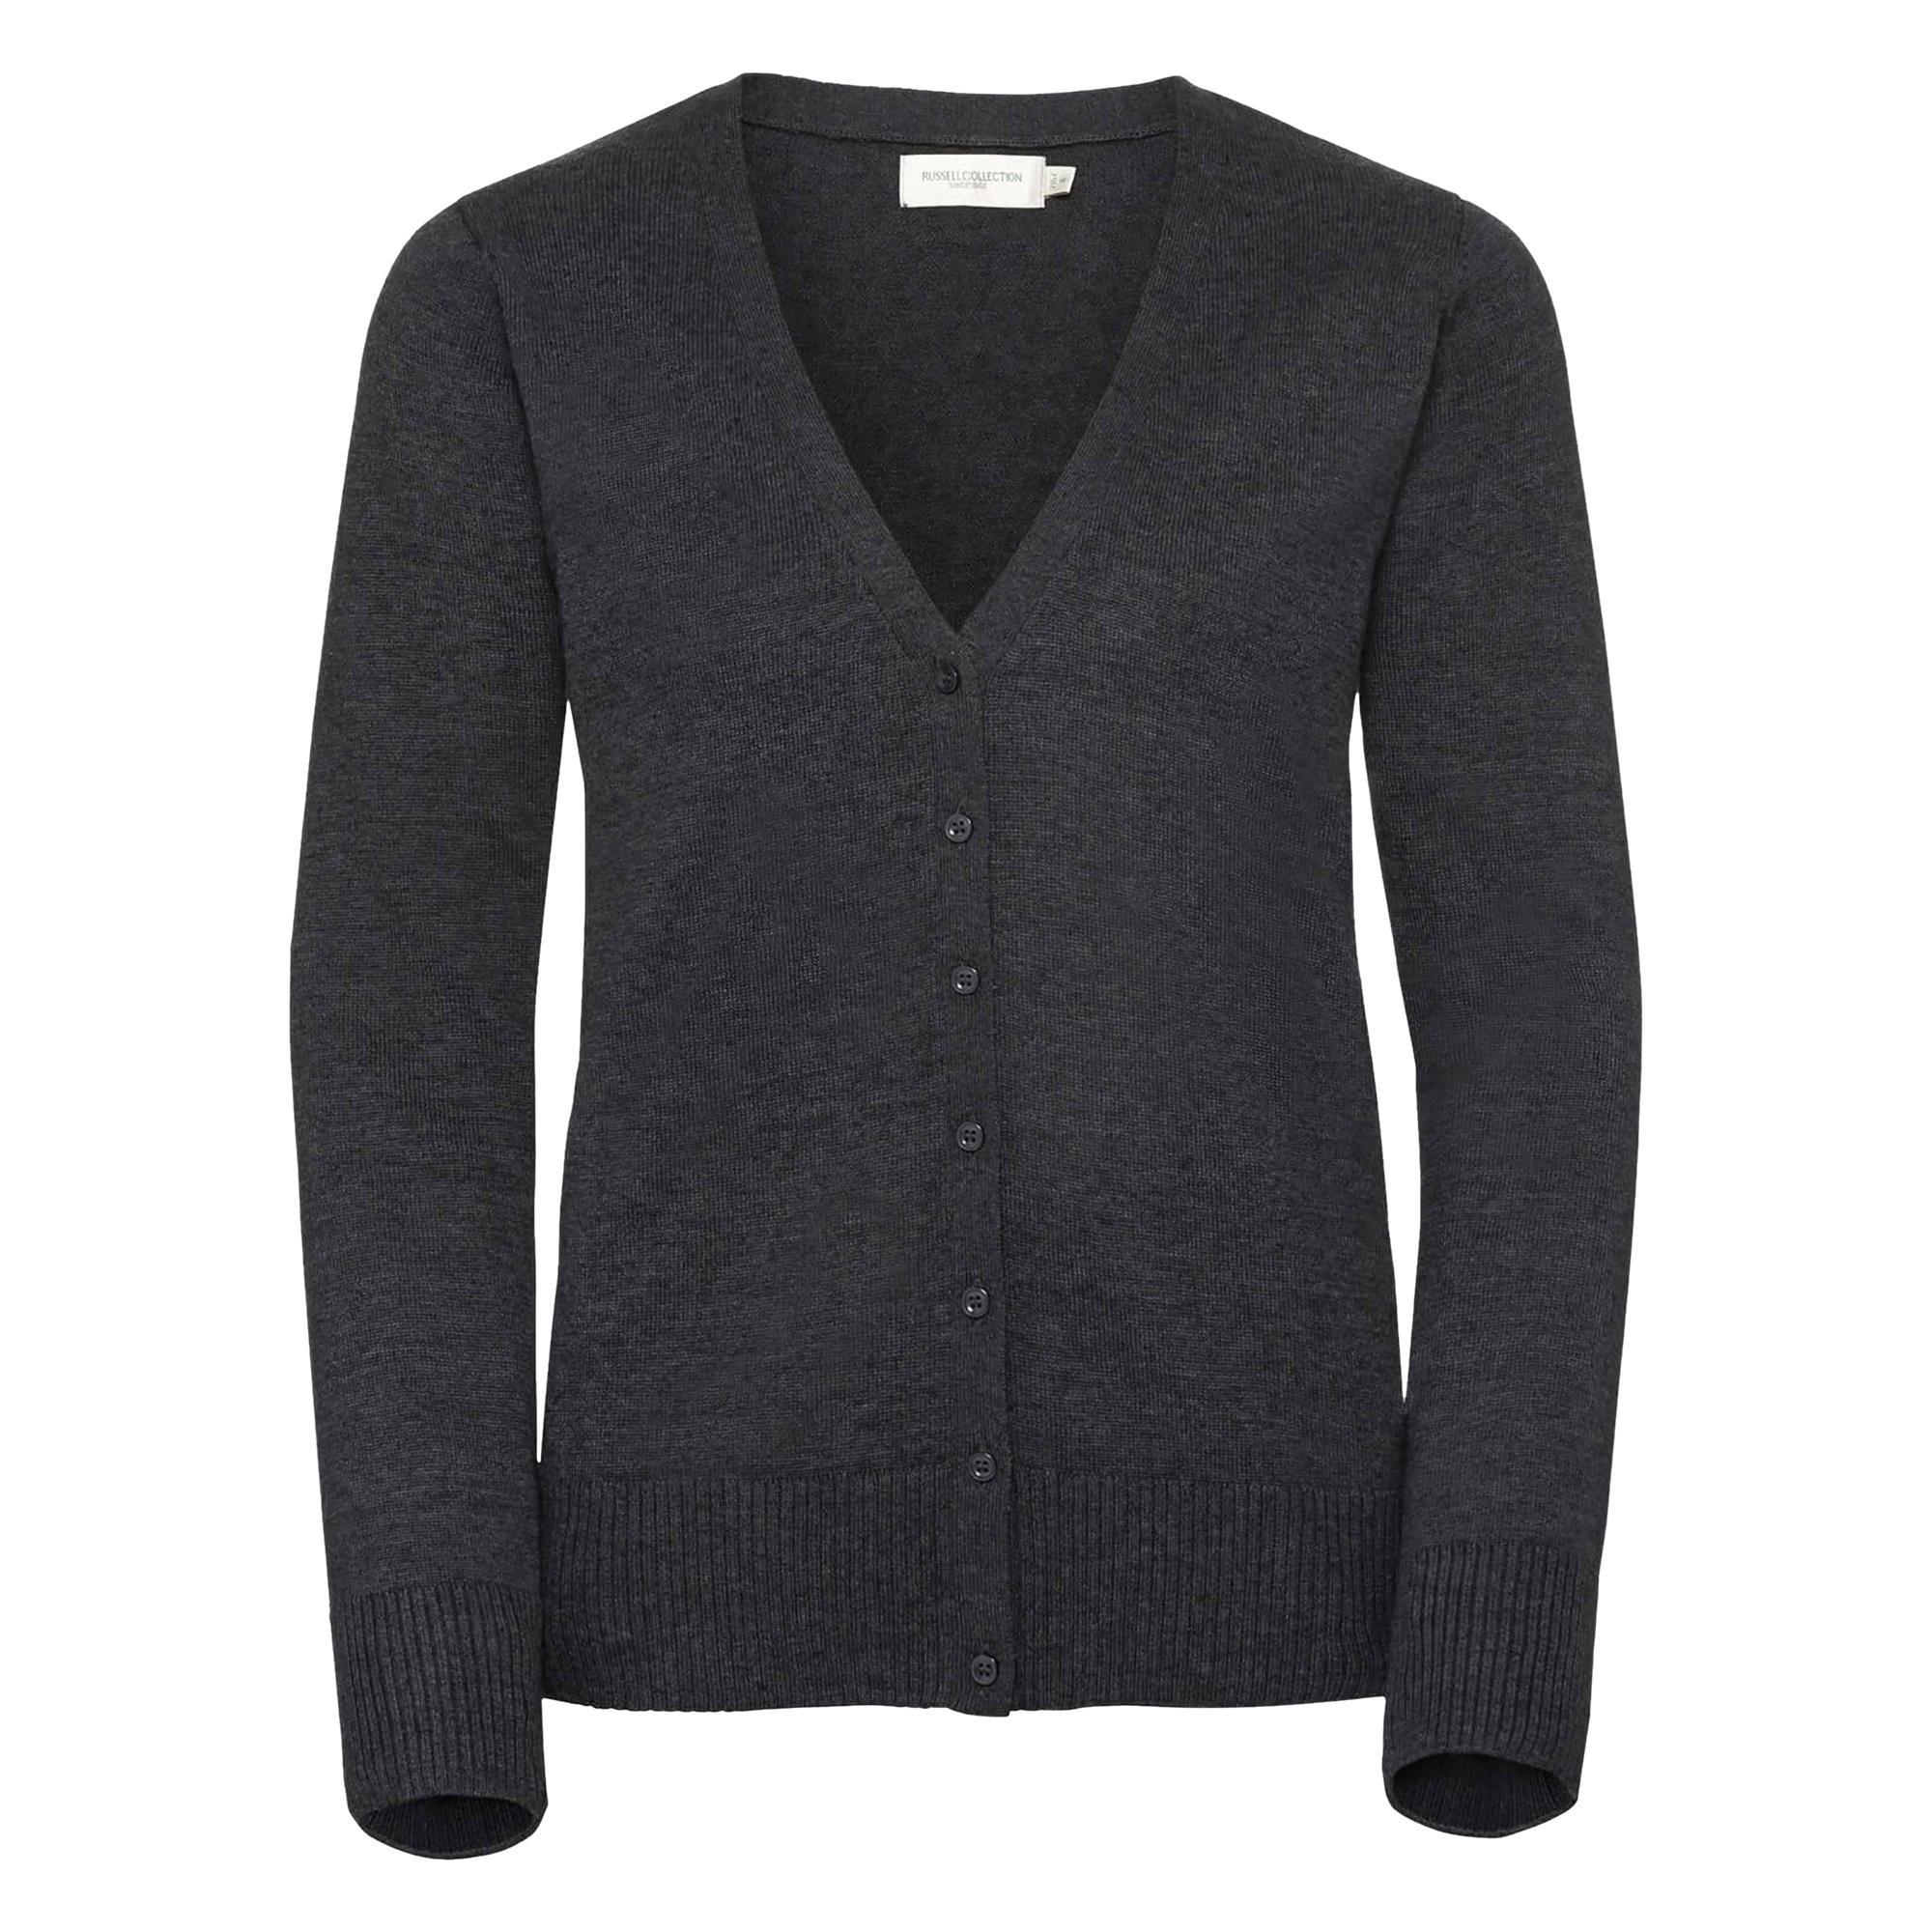 Russell Collection Ladies/Womens V-neck Knitted Cardigan (Charcoal Marl) (4XL)